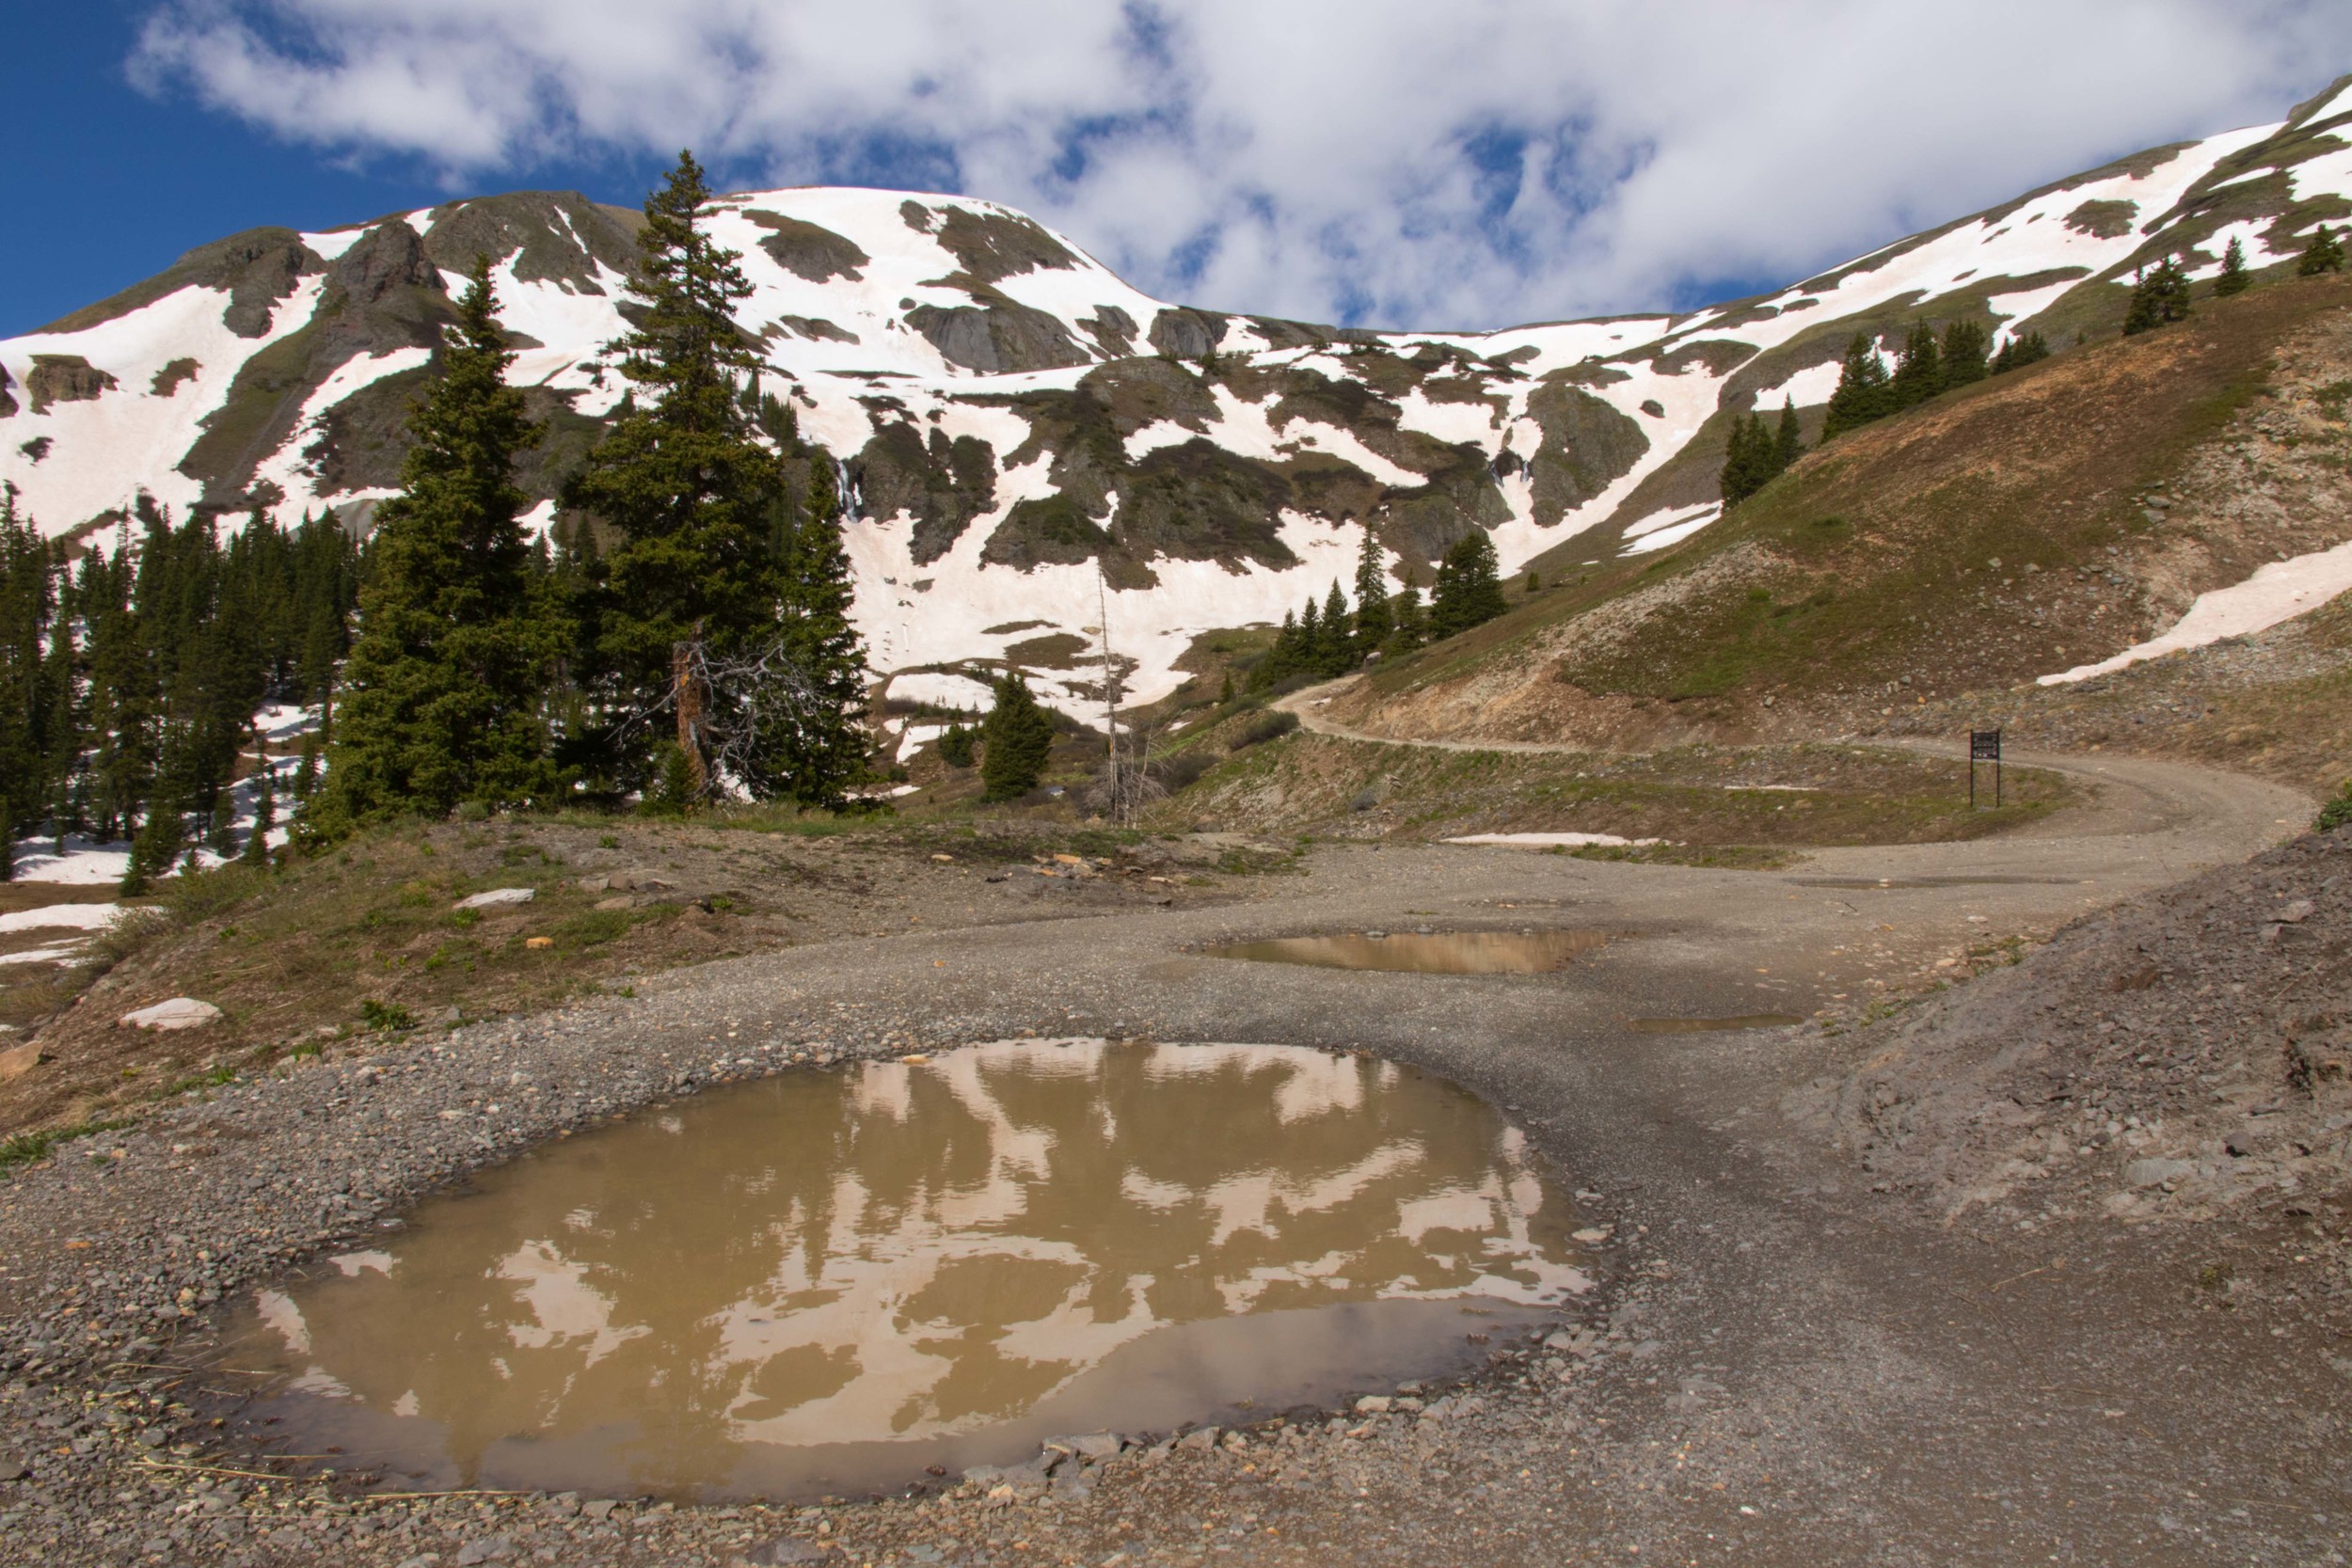 Snowy Reflection in mud puddle, Image#JS_0262